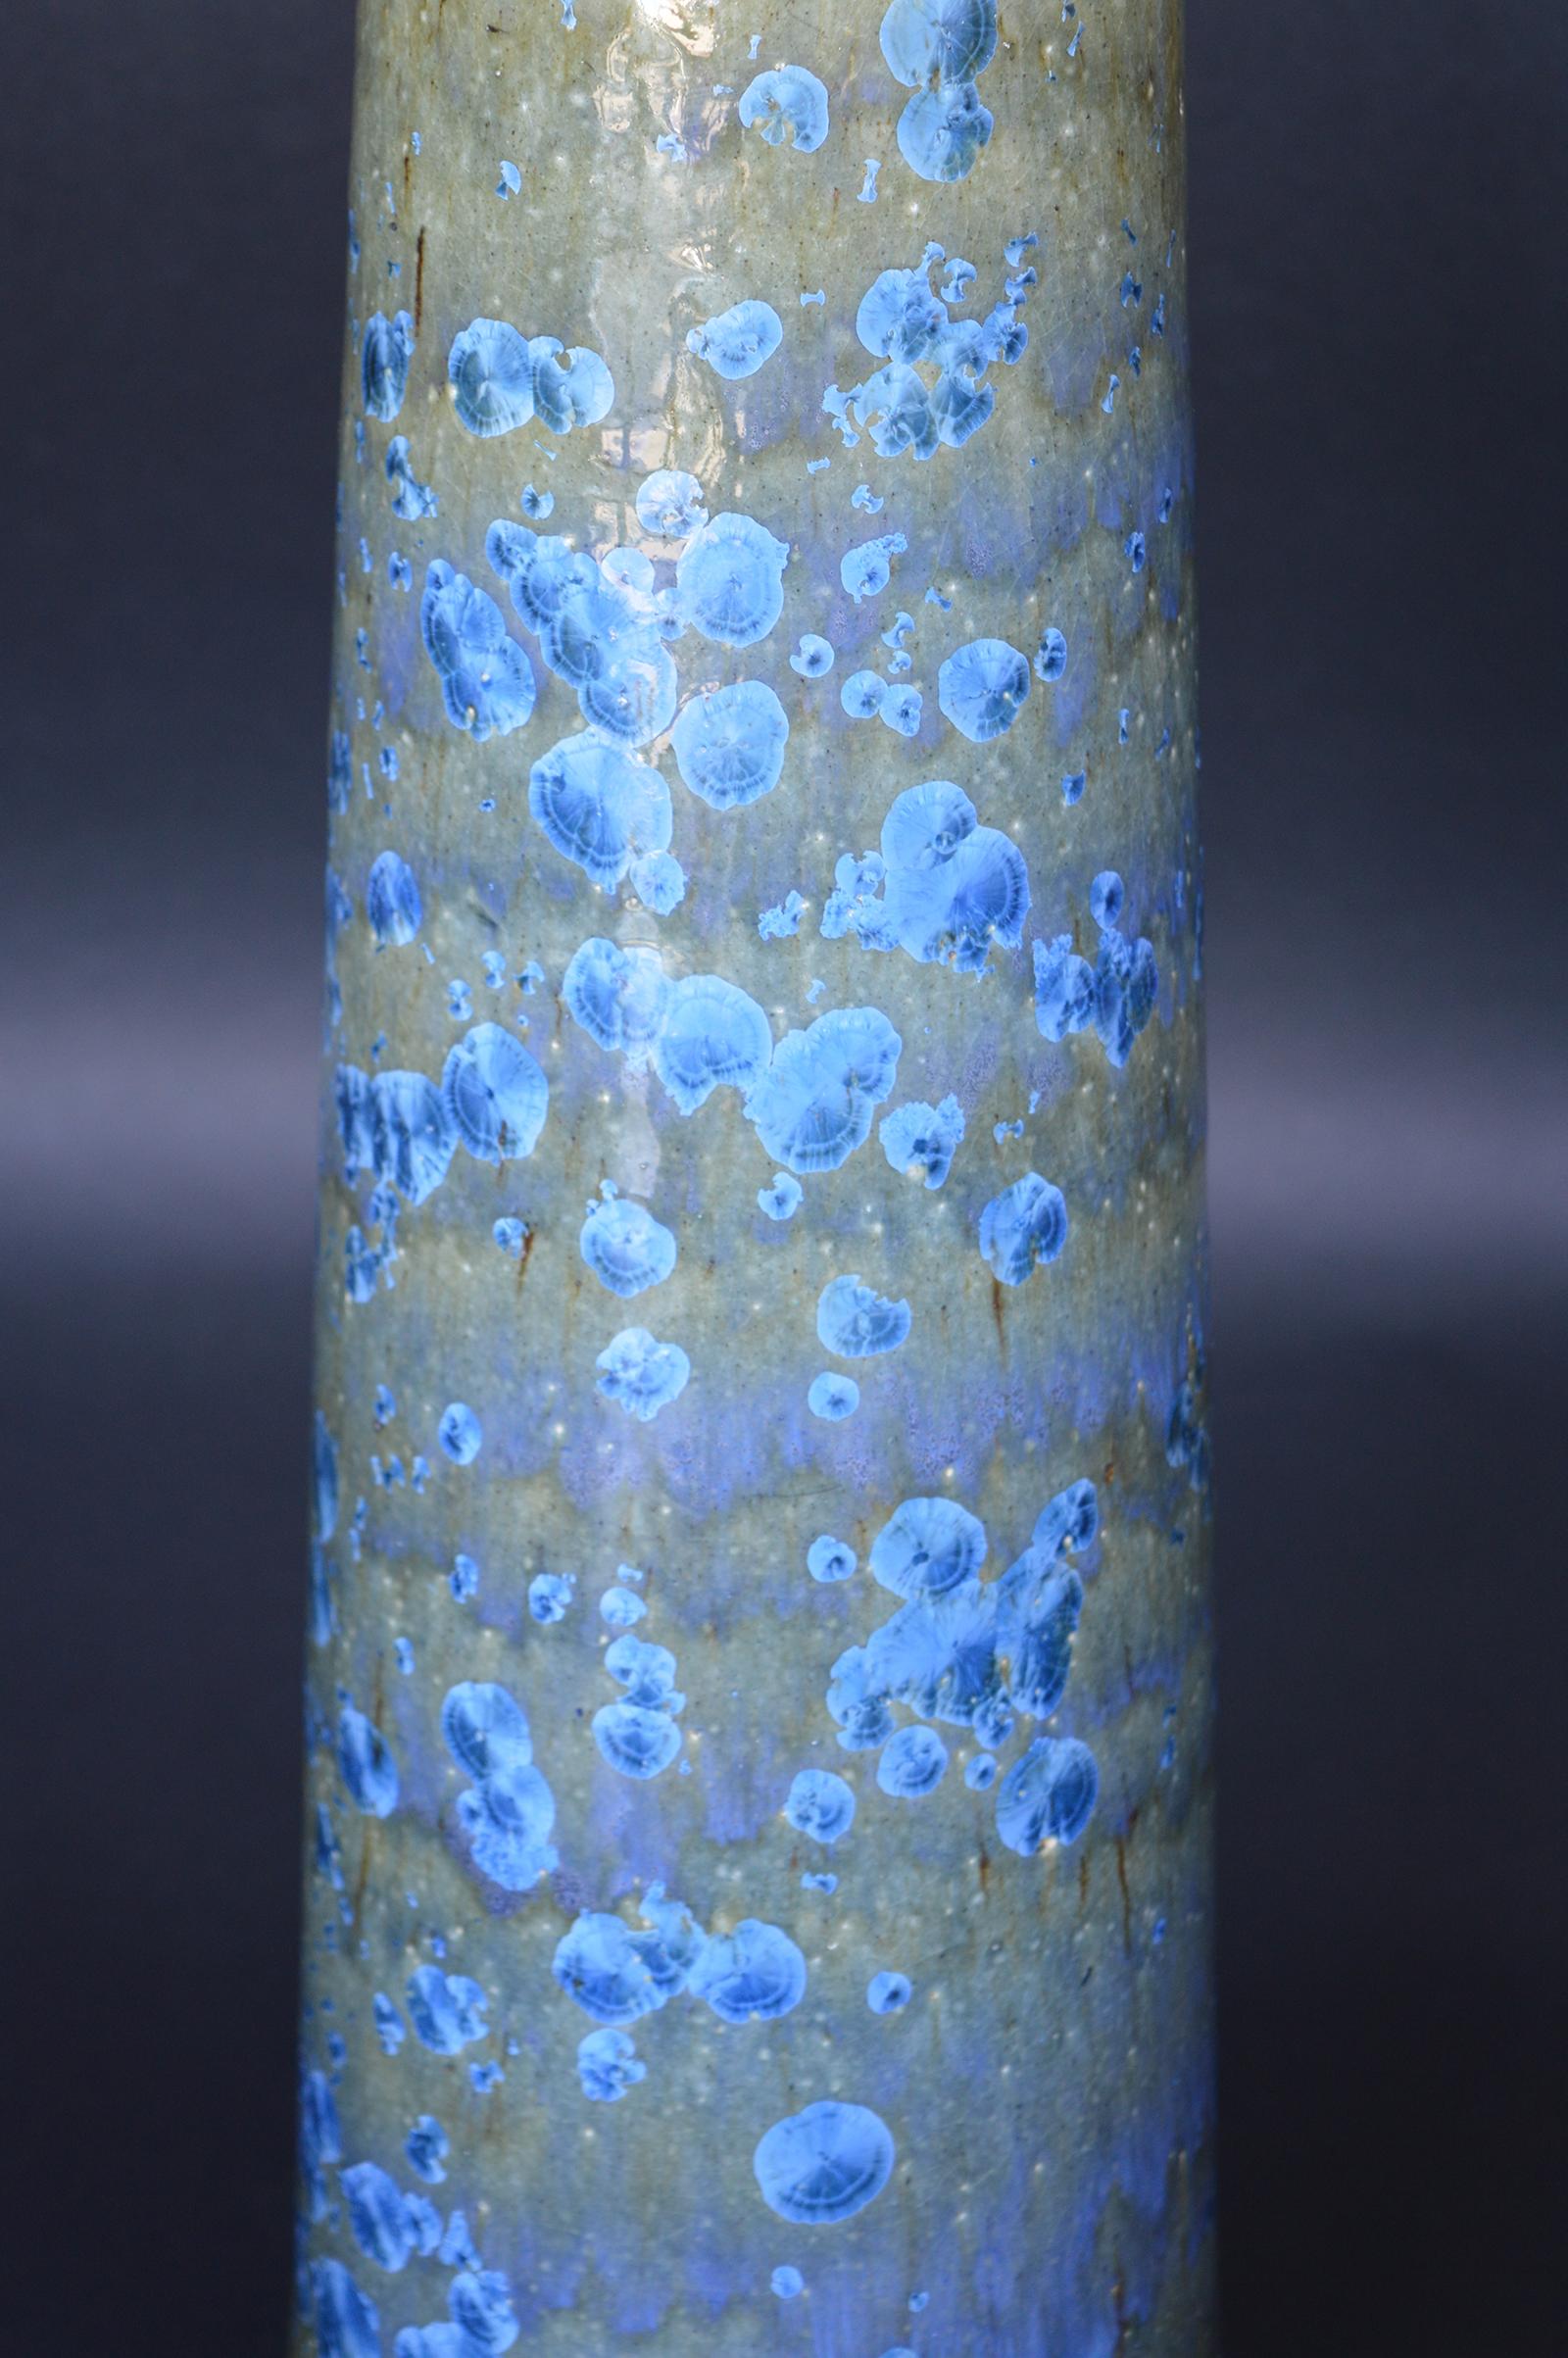 Contemporary Collection of Crystalline Glazed Ceramics